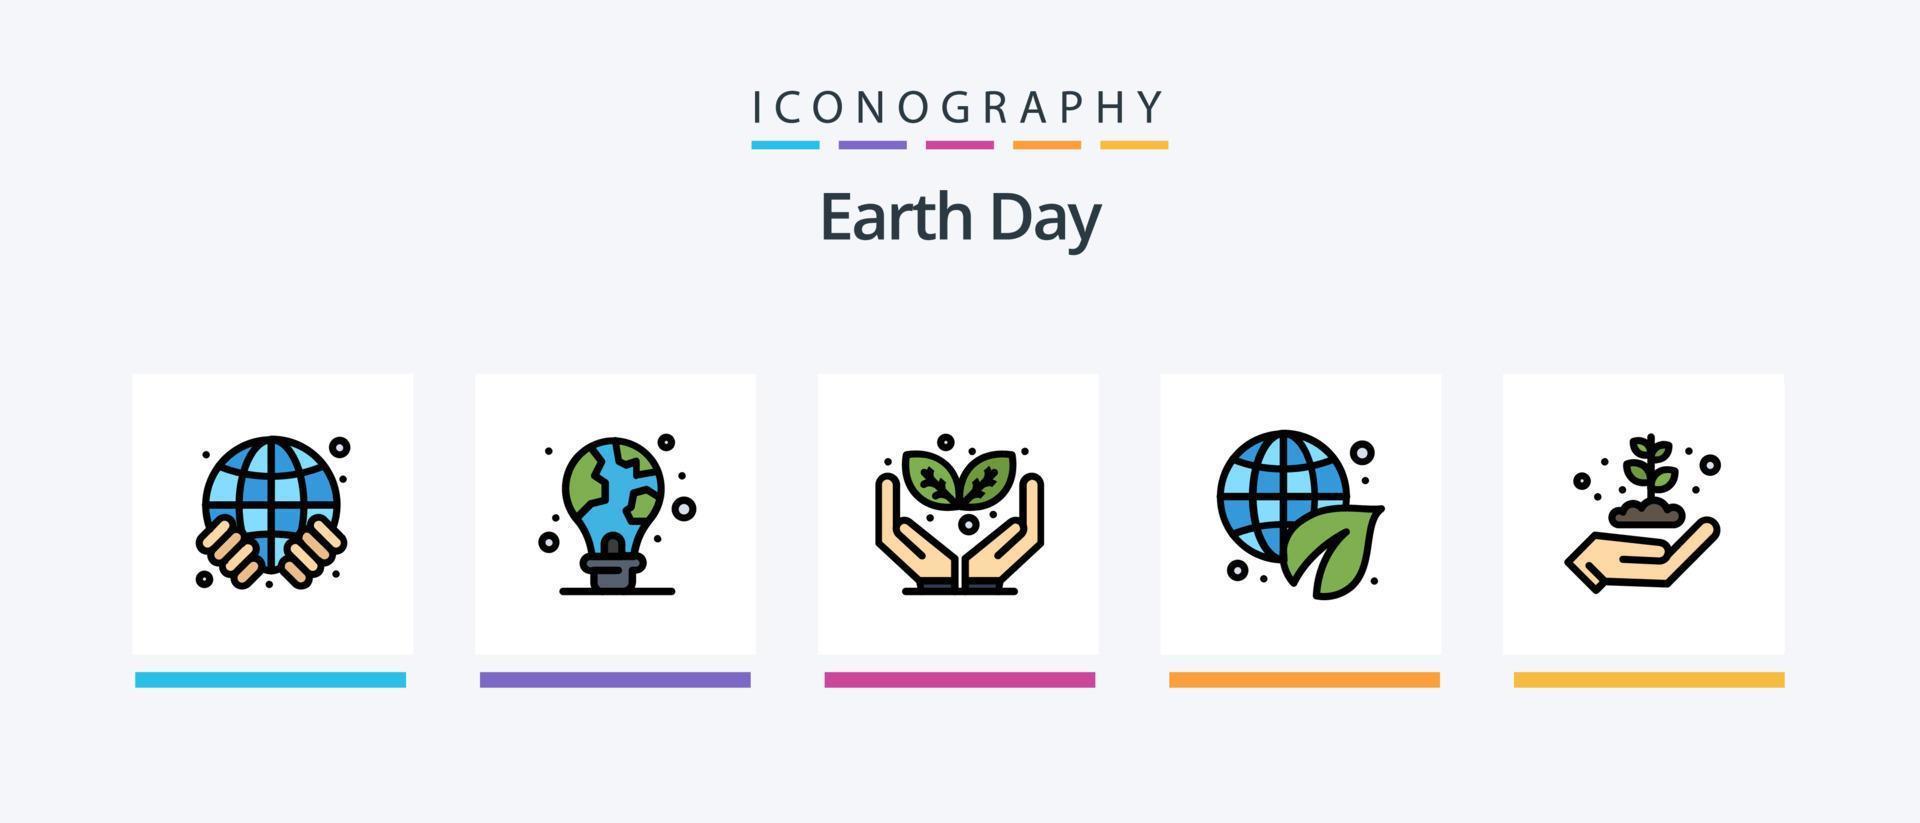 Earth Day Line Filled 5 Icon Pack Including light bulb. green. globe. protection. gear. Creative Icons Design vector